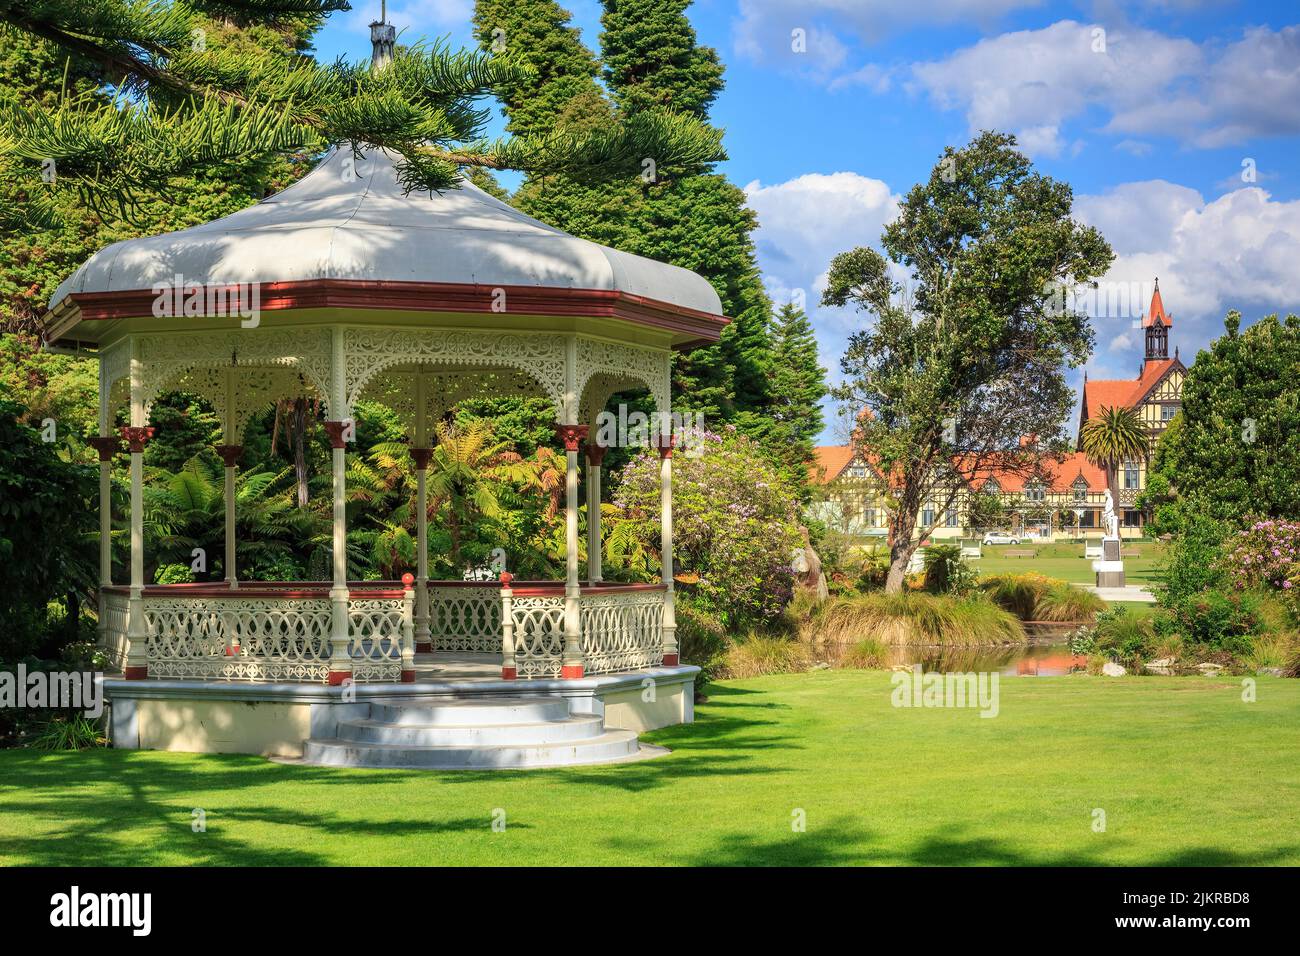 Government Gardens park in Rotorua, New Zealand. In the foreground is a historic band rotunda, with the iconic Rotorua Museum behind Stock Photo